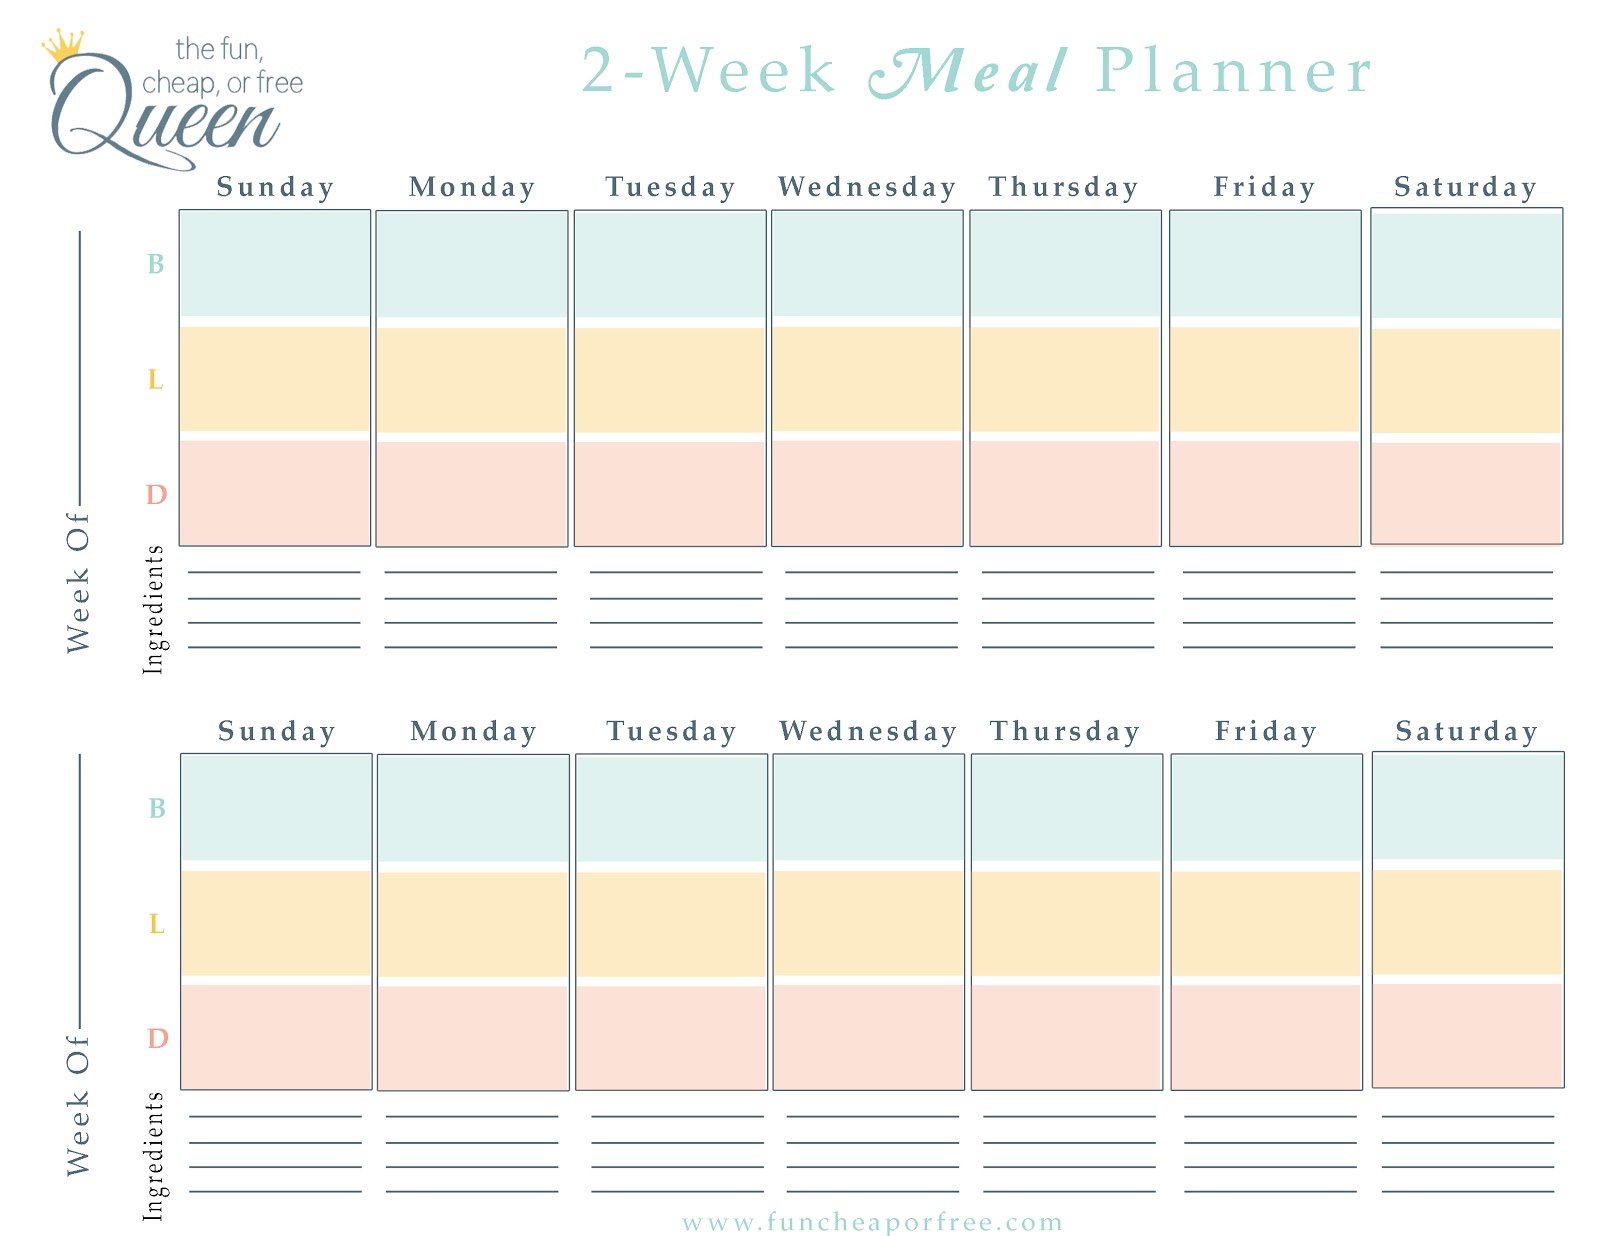 Easy Meal Plan Structure With Free Printables Fun Cheap Or Free